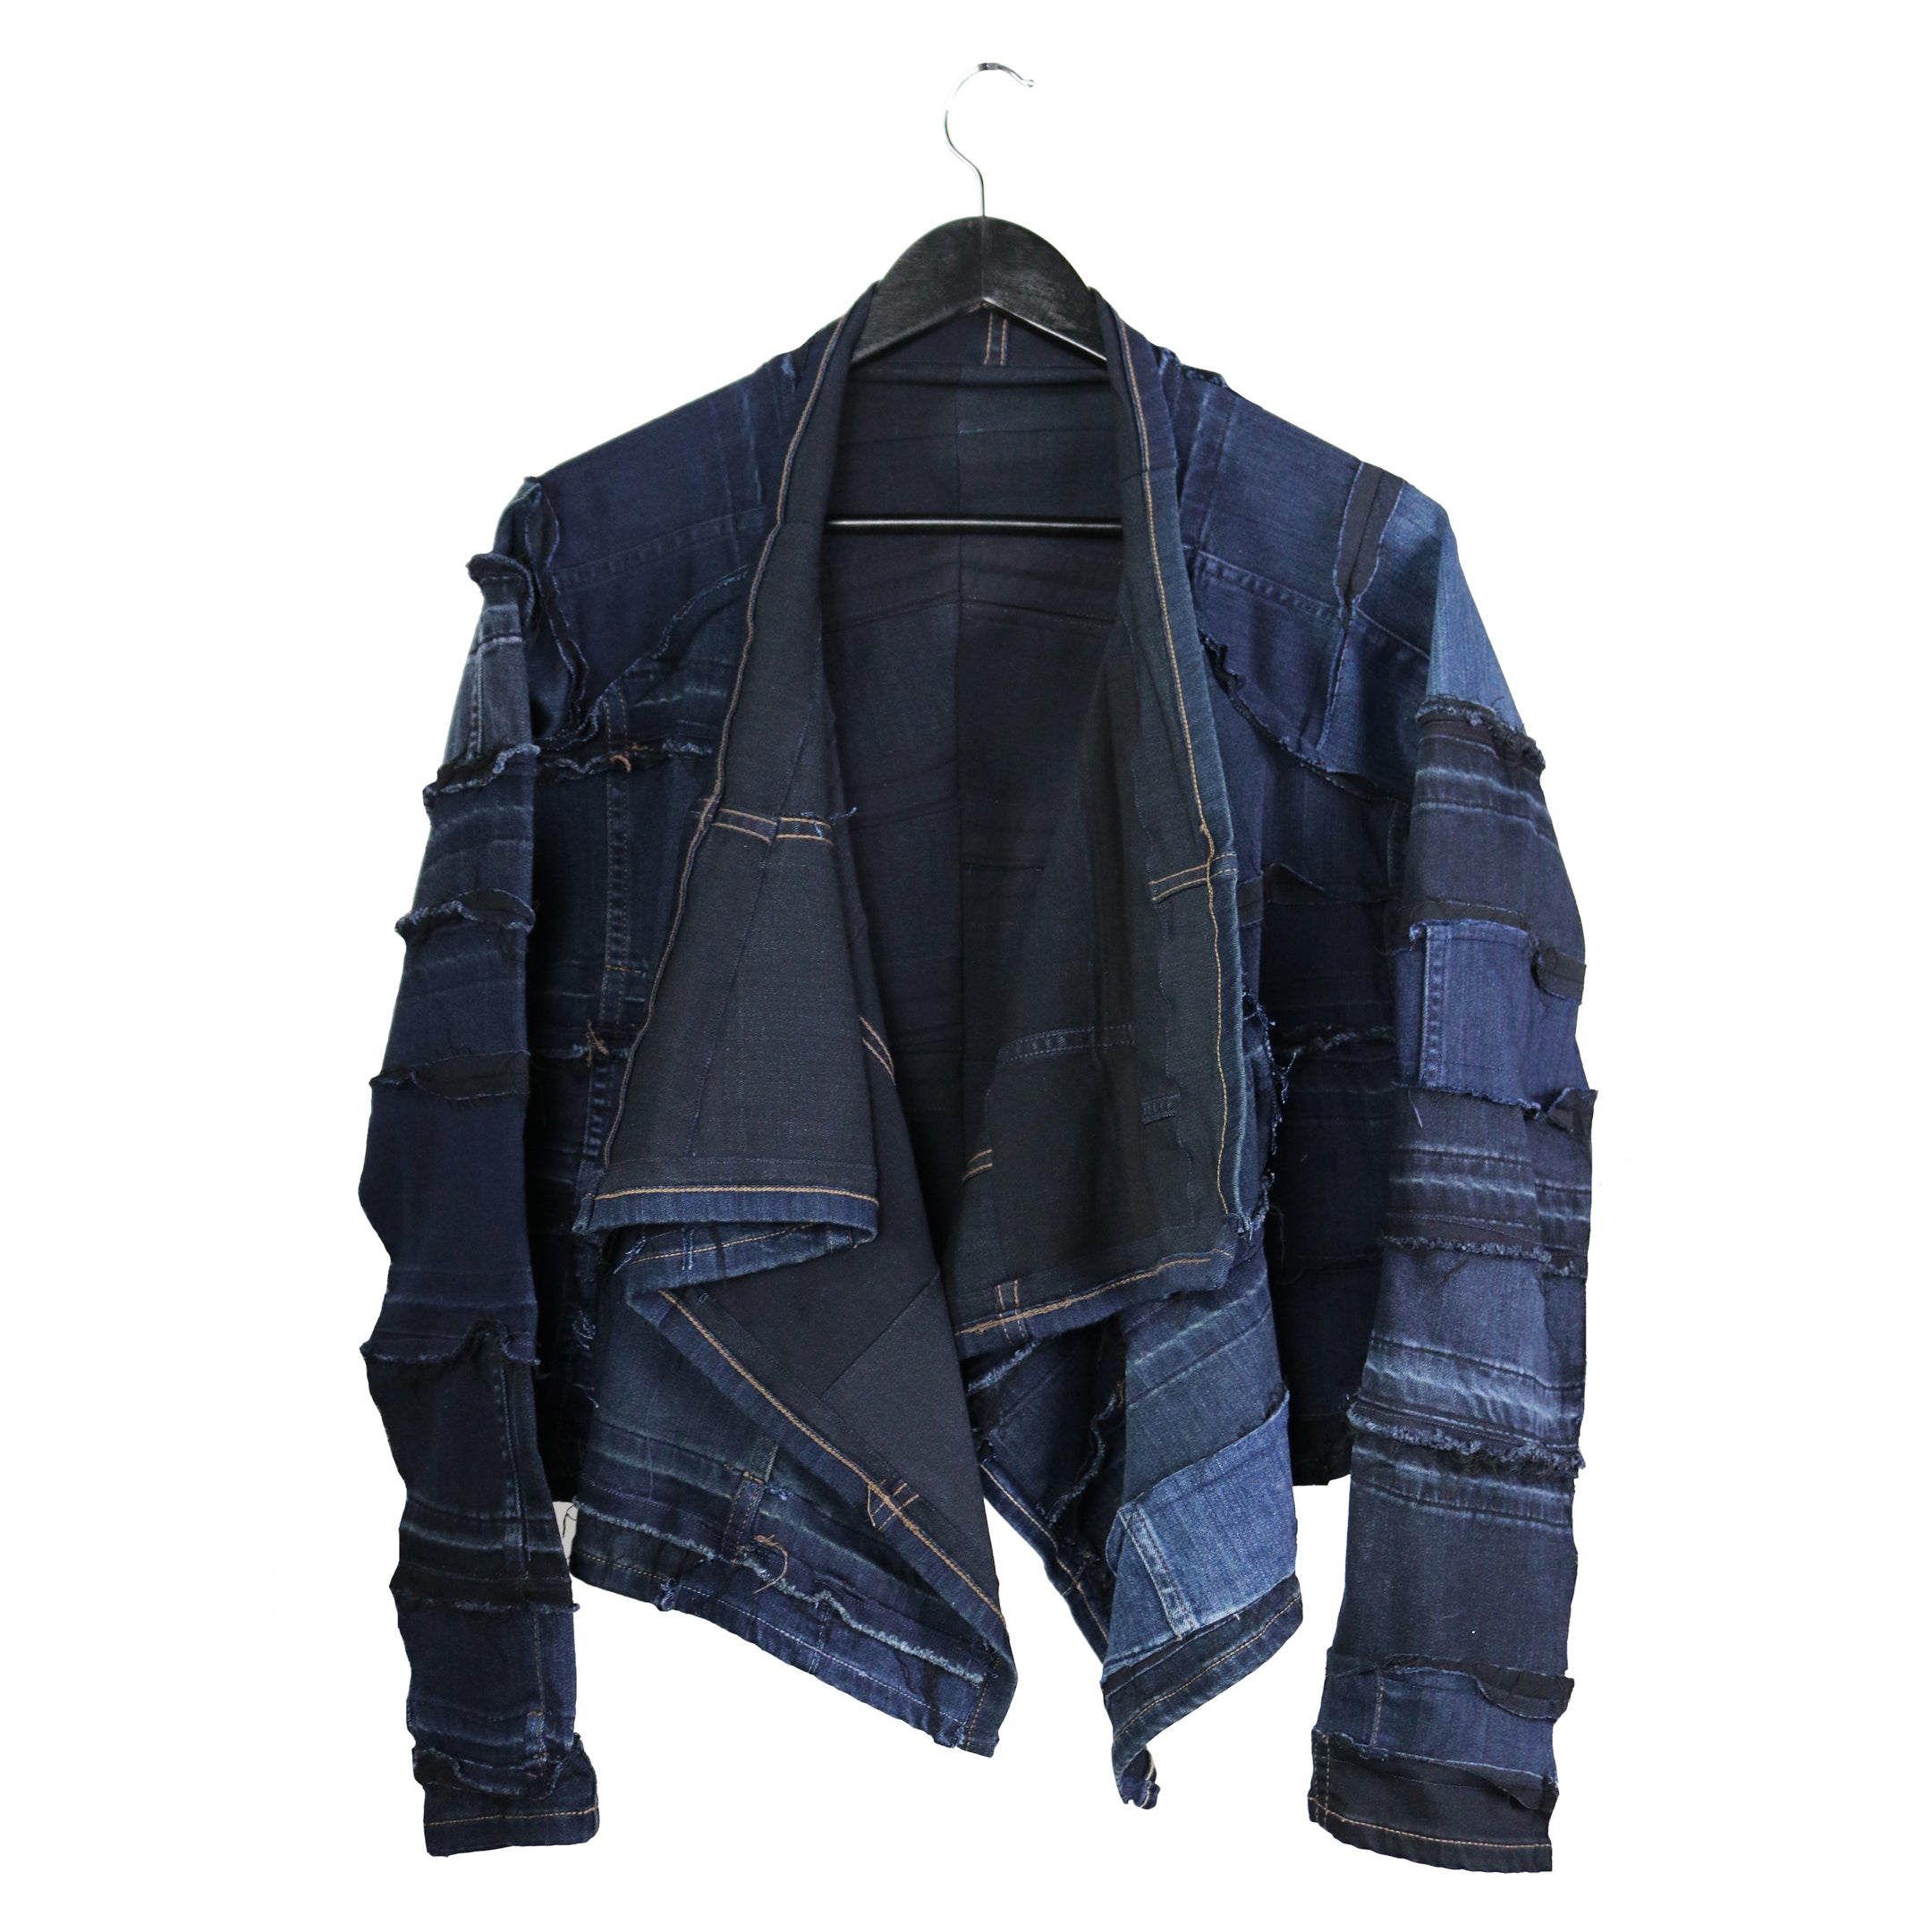 Reversible drape front stretchy denim jacket by stevie leigh